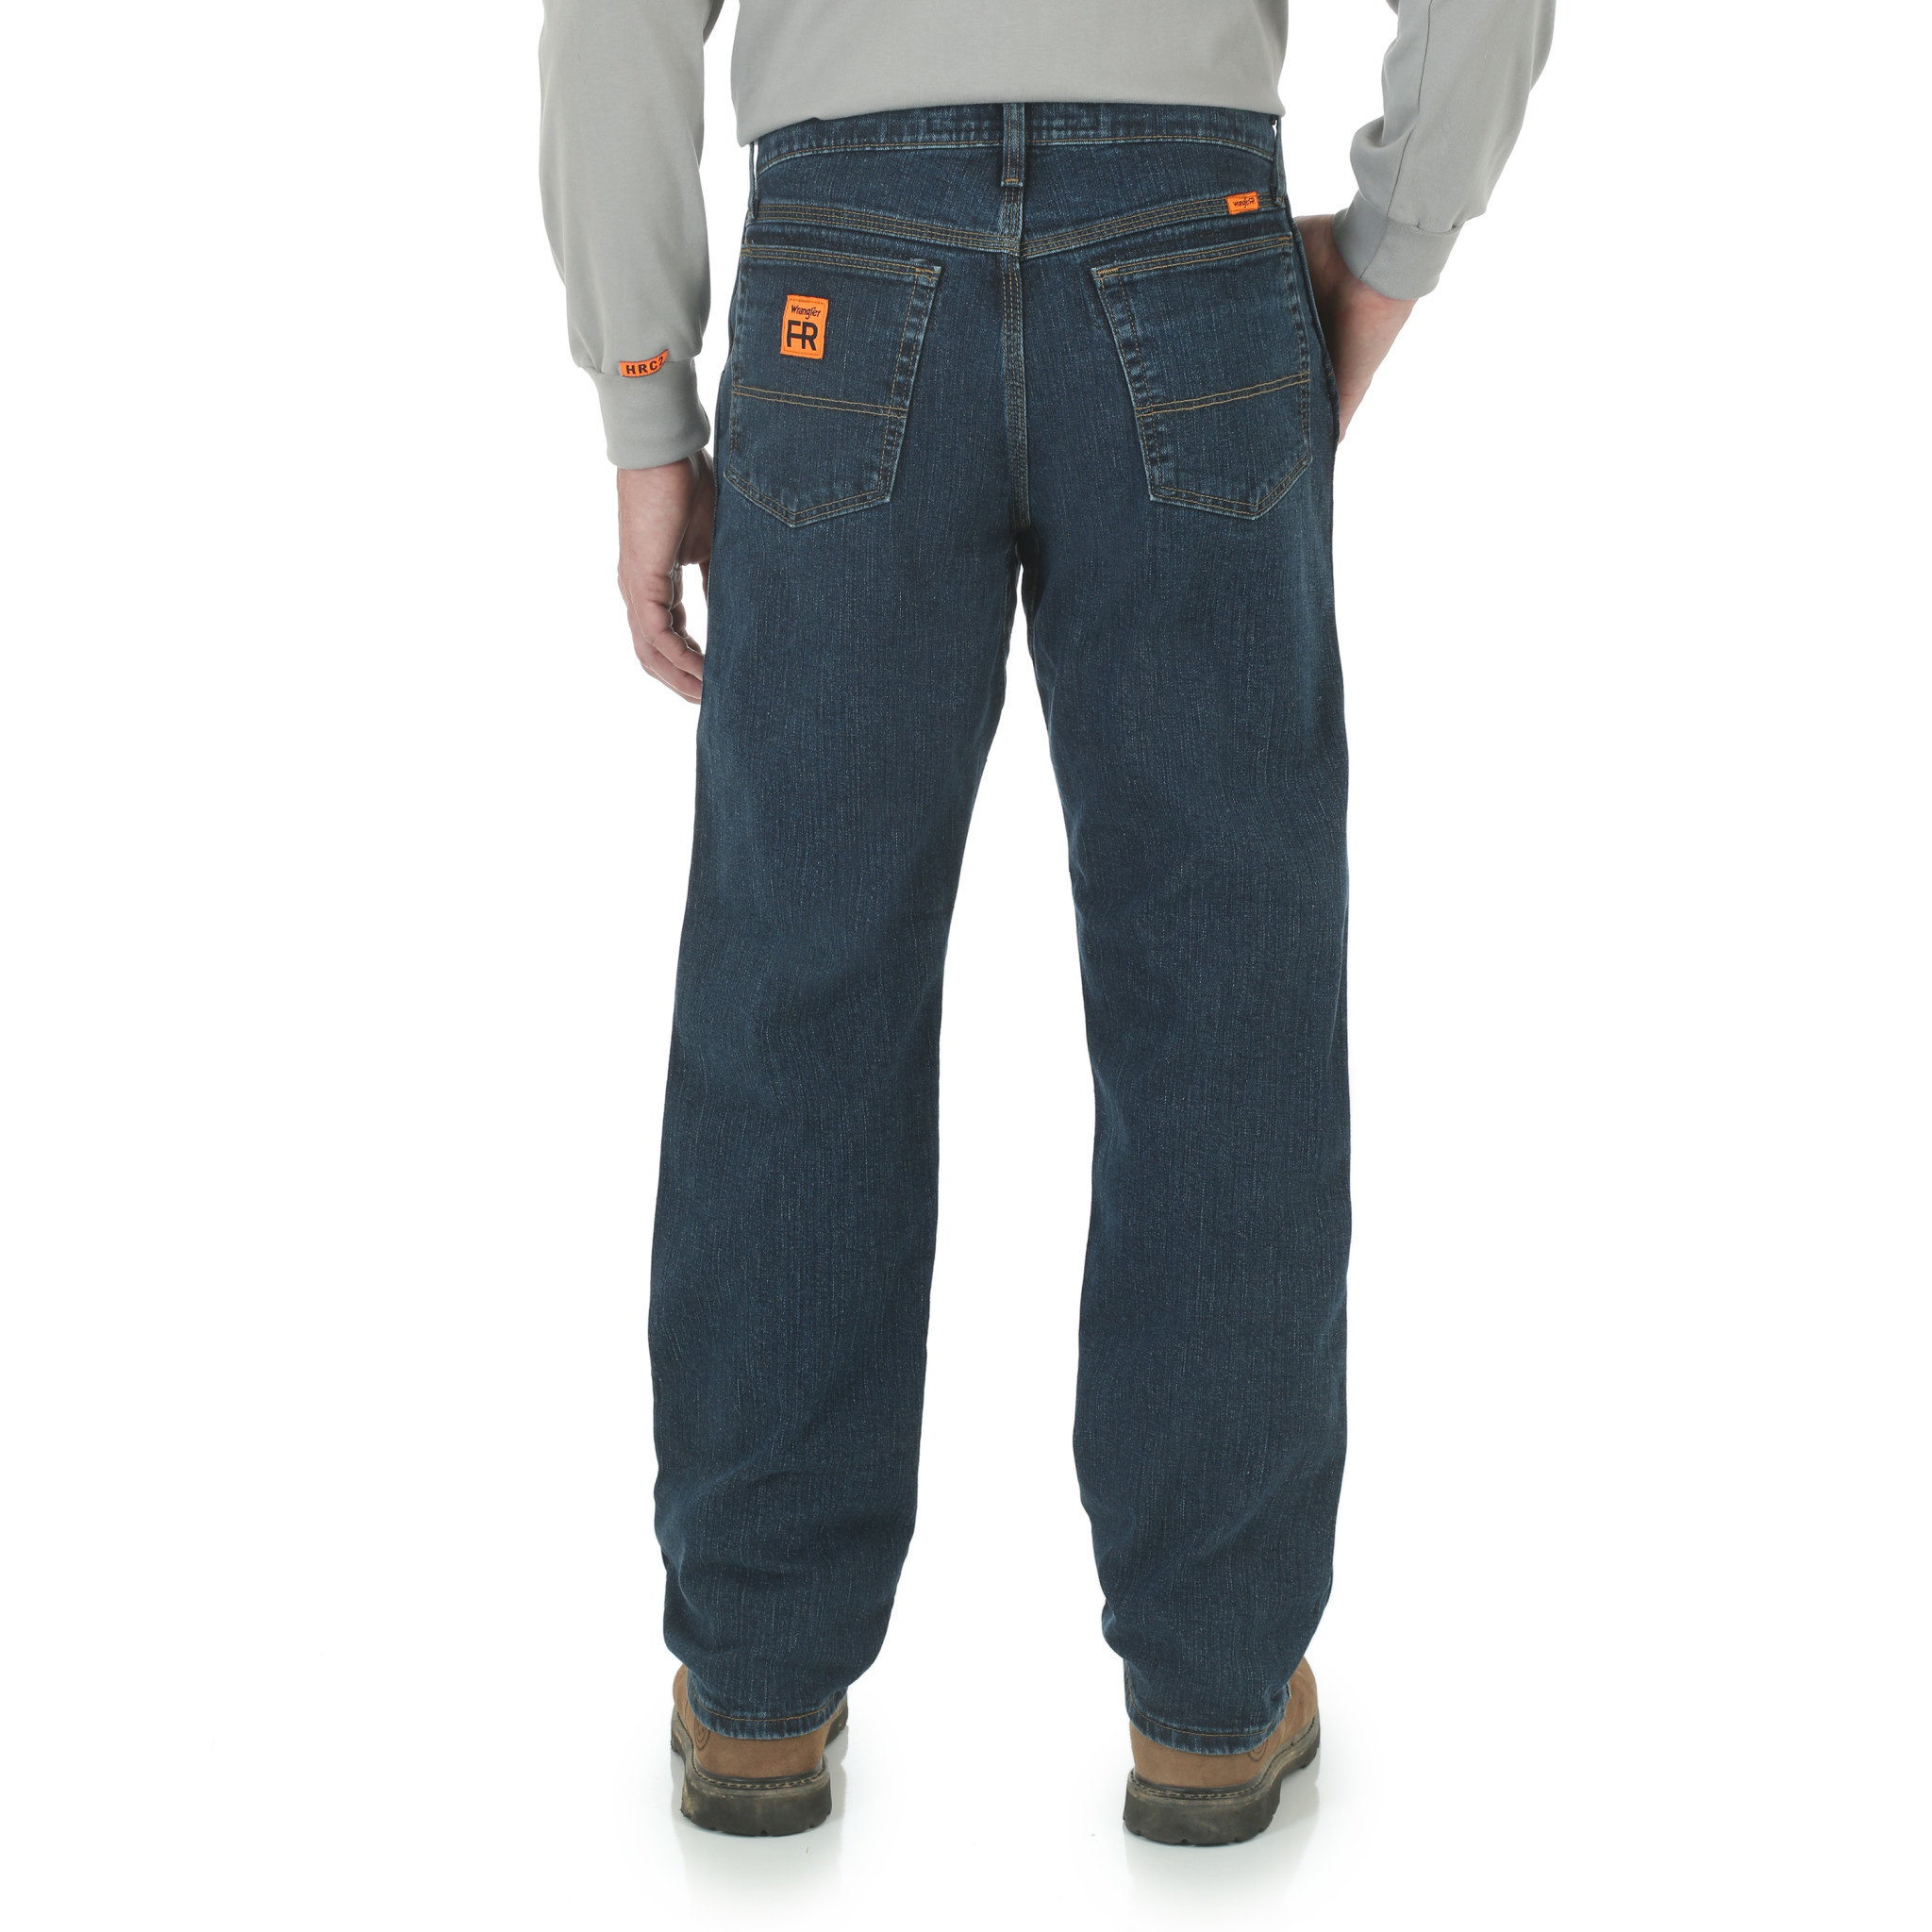 WRANGLER WORK PANTS - AC RELAXED FIT - Rocky Mountain FR Clothing Outlet